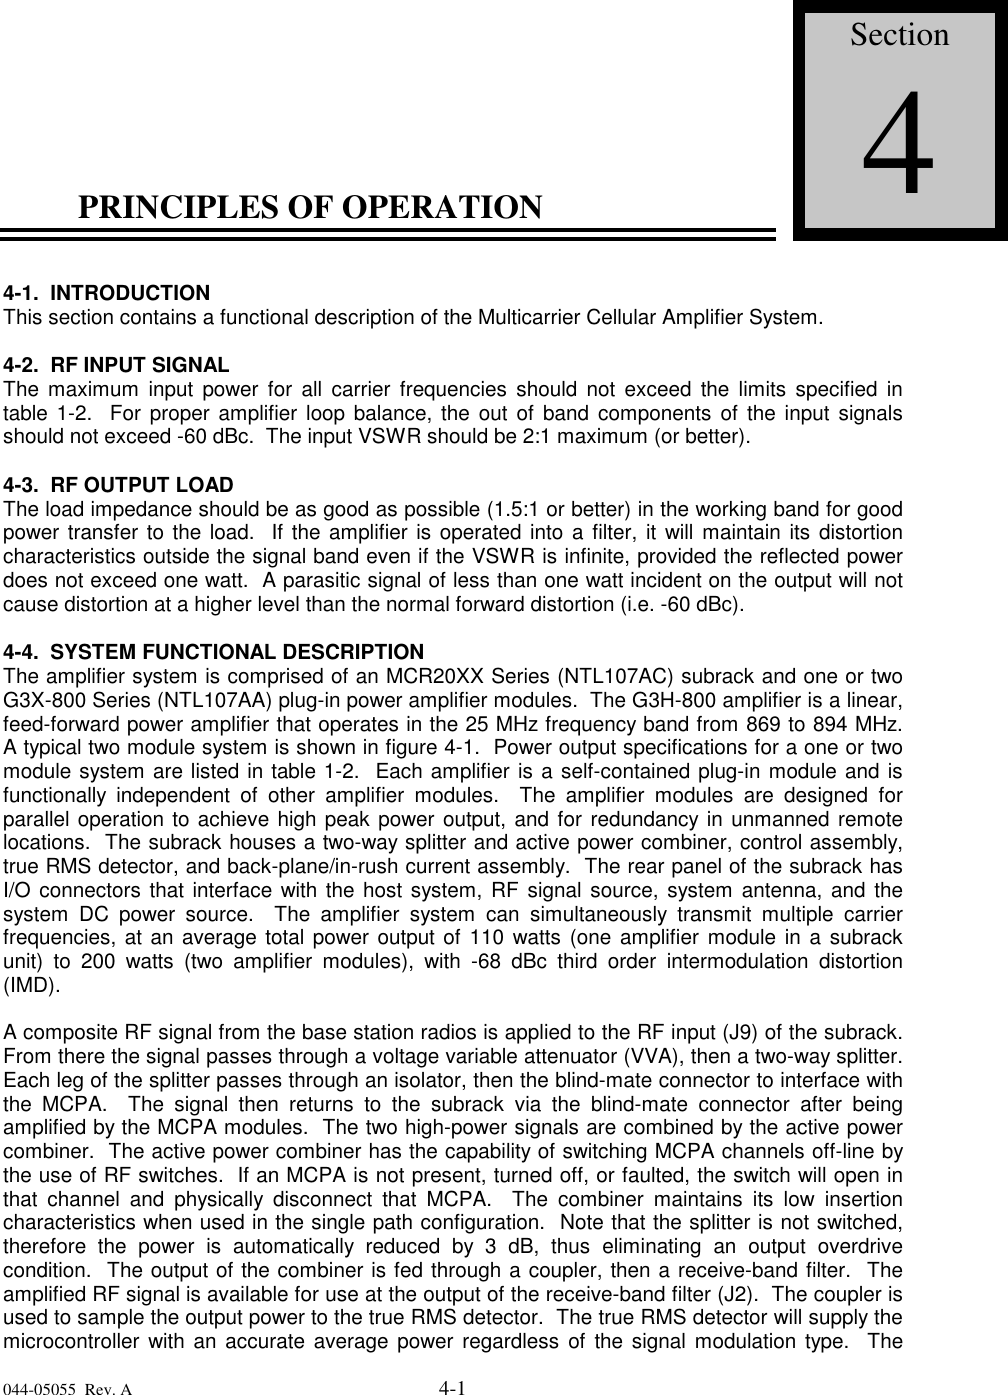 044-05055  Rev. A 4-1PRINCIPLES OF OPERATION4-1.  INTRODUCTIONThis section contains a functional description of the Multicarrier Cellular Amplifier System.4-2.  RF INPUT SIGNALThe maximum input power for all carrier frequencies should not exceed the limits specified intable 1-2.  For proper amplifier loop balance, the out of band components of the input signalsshould not exceed -60 dBc.  The input VSWR should be 2:1 maximum (or better).4-3.  RF OUTPUT LOADThe load impedance should be as good as possible (1.5:1 or better) in the working band for goodpower transfer to the load.  If the amplifier is operated into a filter, it will maintain its distortioncharacteristics outside the signal band even if the VSWR is infinite, provided the reflected powerdoes not exceed one watt.  A parasitic signal of less than one watt incident on the output will notcause distortion at a higher level than the normal forward distortion (i.e. -60 dBc).4-4.  SYSTEM FUNCTIONAL DESCRIPTIONThe amplifier system is comprised of an MCR20XX Series (NTL107AC) subrack and one or twoG3X-800 Series (NTL107AA) plug-in power amplifier modules.  The G3H-800 amplifier is a linear,feed-forward power amplifier that operates in the 25 MHz frequency band from 869 to 894 MHz.A typical two module system is shown in figure 4-1.  Power output specifications for a one or twomodule system are listed in table 1-2.  Each amplifier is a self-contained plug-in module and isfunctionally independent of other amplifier modules.  The amplifier modules are designed forparallel operation to achieve high peak power output, and for redundancy in unmanned remotelocations.  The subrack houses a two-way splitter and active power combiner, control assembly,true RMS detector, and back-plane/in-rush current assembly.  The rear panel of the subrack hasI/O connectors that interface with the host system, RF signal source, system antenna, and thesystem DC power source.  The amplifier system can simultaneously transmit multiple carrierfrequencies, at an average total power output of 110 watts (one amplifier module in a subrackunit) to 200 watts (two amplifier modules), with -68 dBc third order intermodulation distortion(IMD).A composite RF signal from the base station radios is applied to the RF input (J9) of the subrack.From there the signal passes through a voltage variable attenuator (VVA), then a two-way splitter.Each leg of the splitter passes through an isolator, then the blind-mate connector to interface withthe MCPA.  The signal then returns to the subrack via the blind-mate connector after beingamplified by the MCPA modules.  The two high-power signals are combined by the active powercombiner.  The active power combiner has the capability of switching MCPA channels off-line bythe use of RF switches.  If an MCPA is not present, turned off, or faulted, the switch will open inthat channel and physically disconnect that MCPA.  The combiner maintains its low insertioncharacteristics when used in the single path configuration.  Note that the splitter is not switched,therefore the power is automatically reduced by 3 dB, thus eliminating an output overdrivecondition.  The output of the combiner is fed through a coupler, then a receive-band filter.  Theamplified RF signal is available for use at the output of the receive-band filter (J2).  The coupler isused to sample the output power to the true RMS detector.  The true RMS detector will supply themicrocontroller with an accurate average power regardless of the signal modulation type.  TheSection4